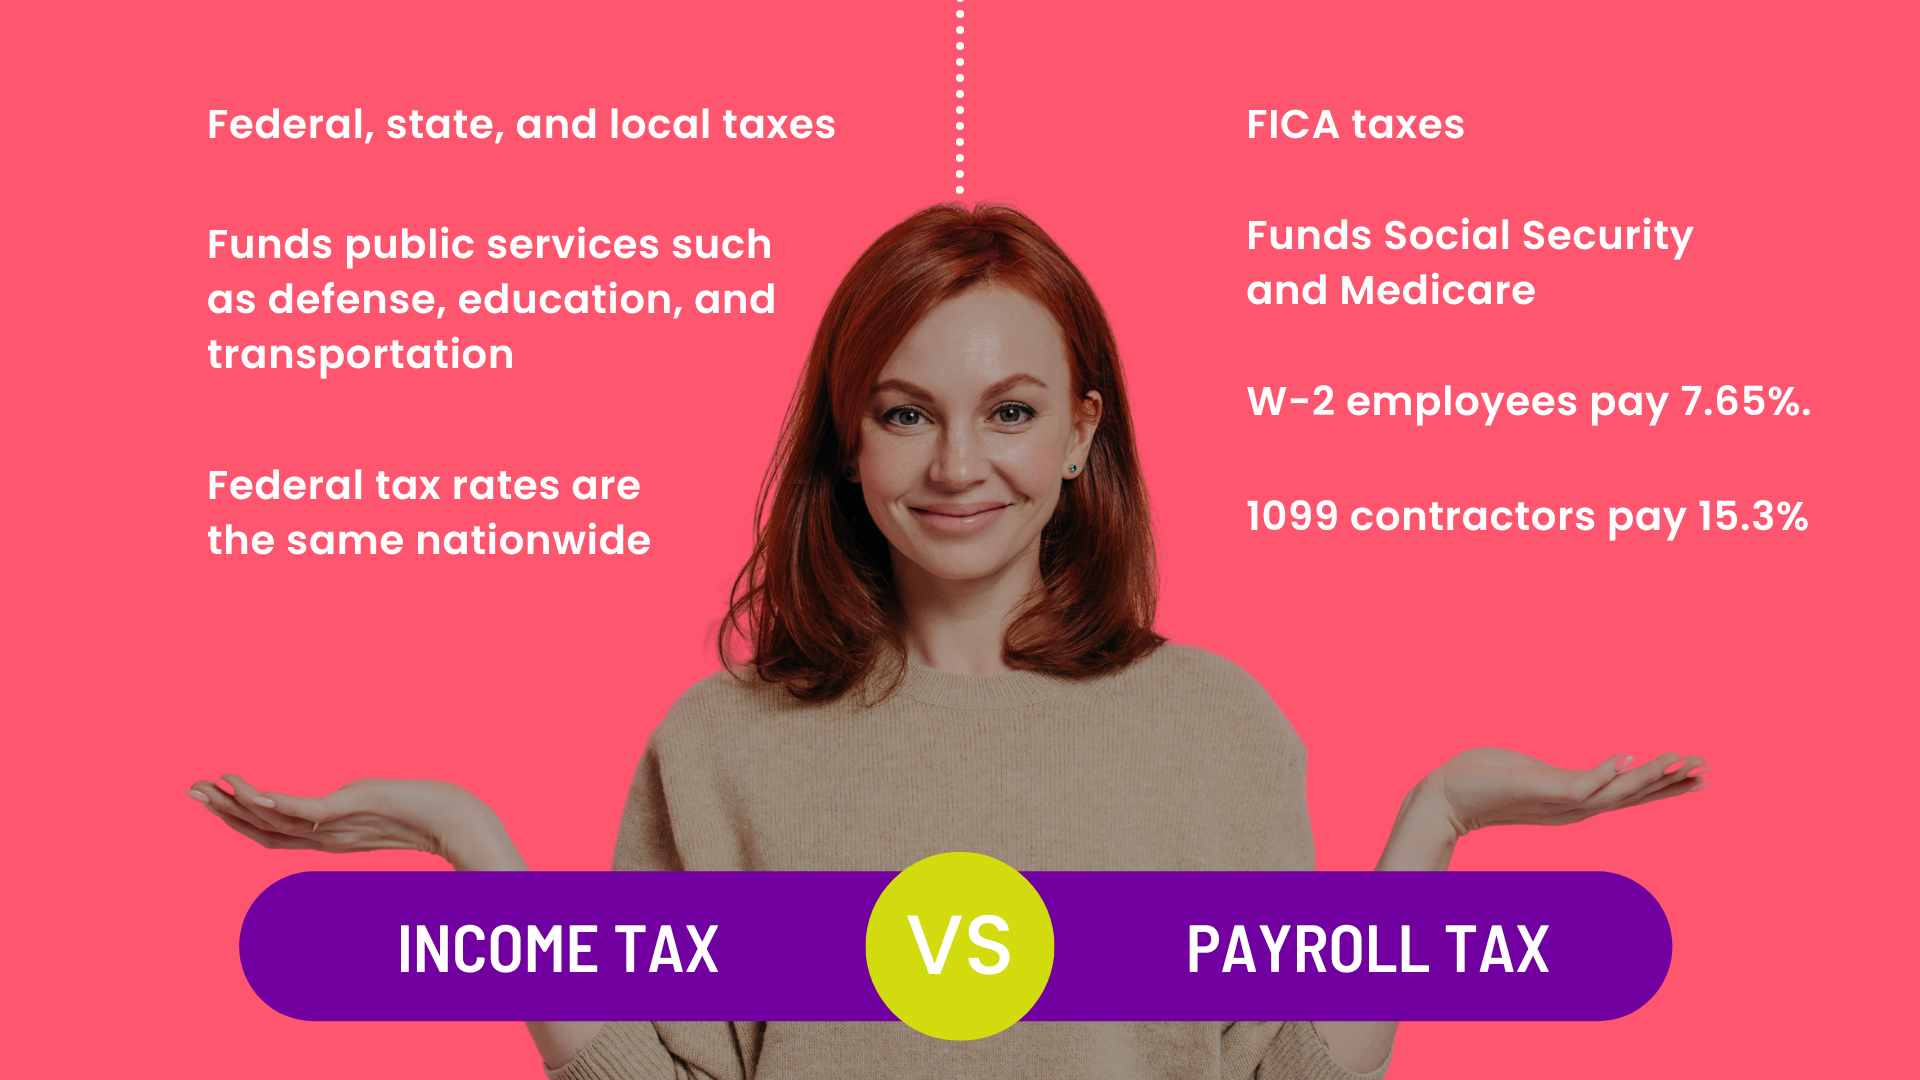 A woman showcasing the differences between income tax and payroll tax.  